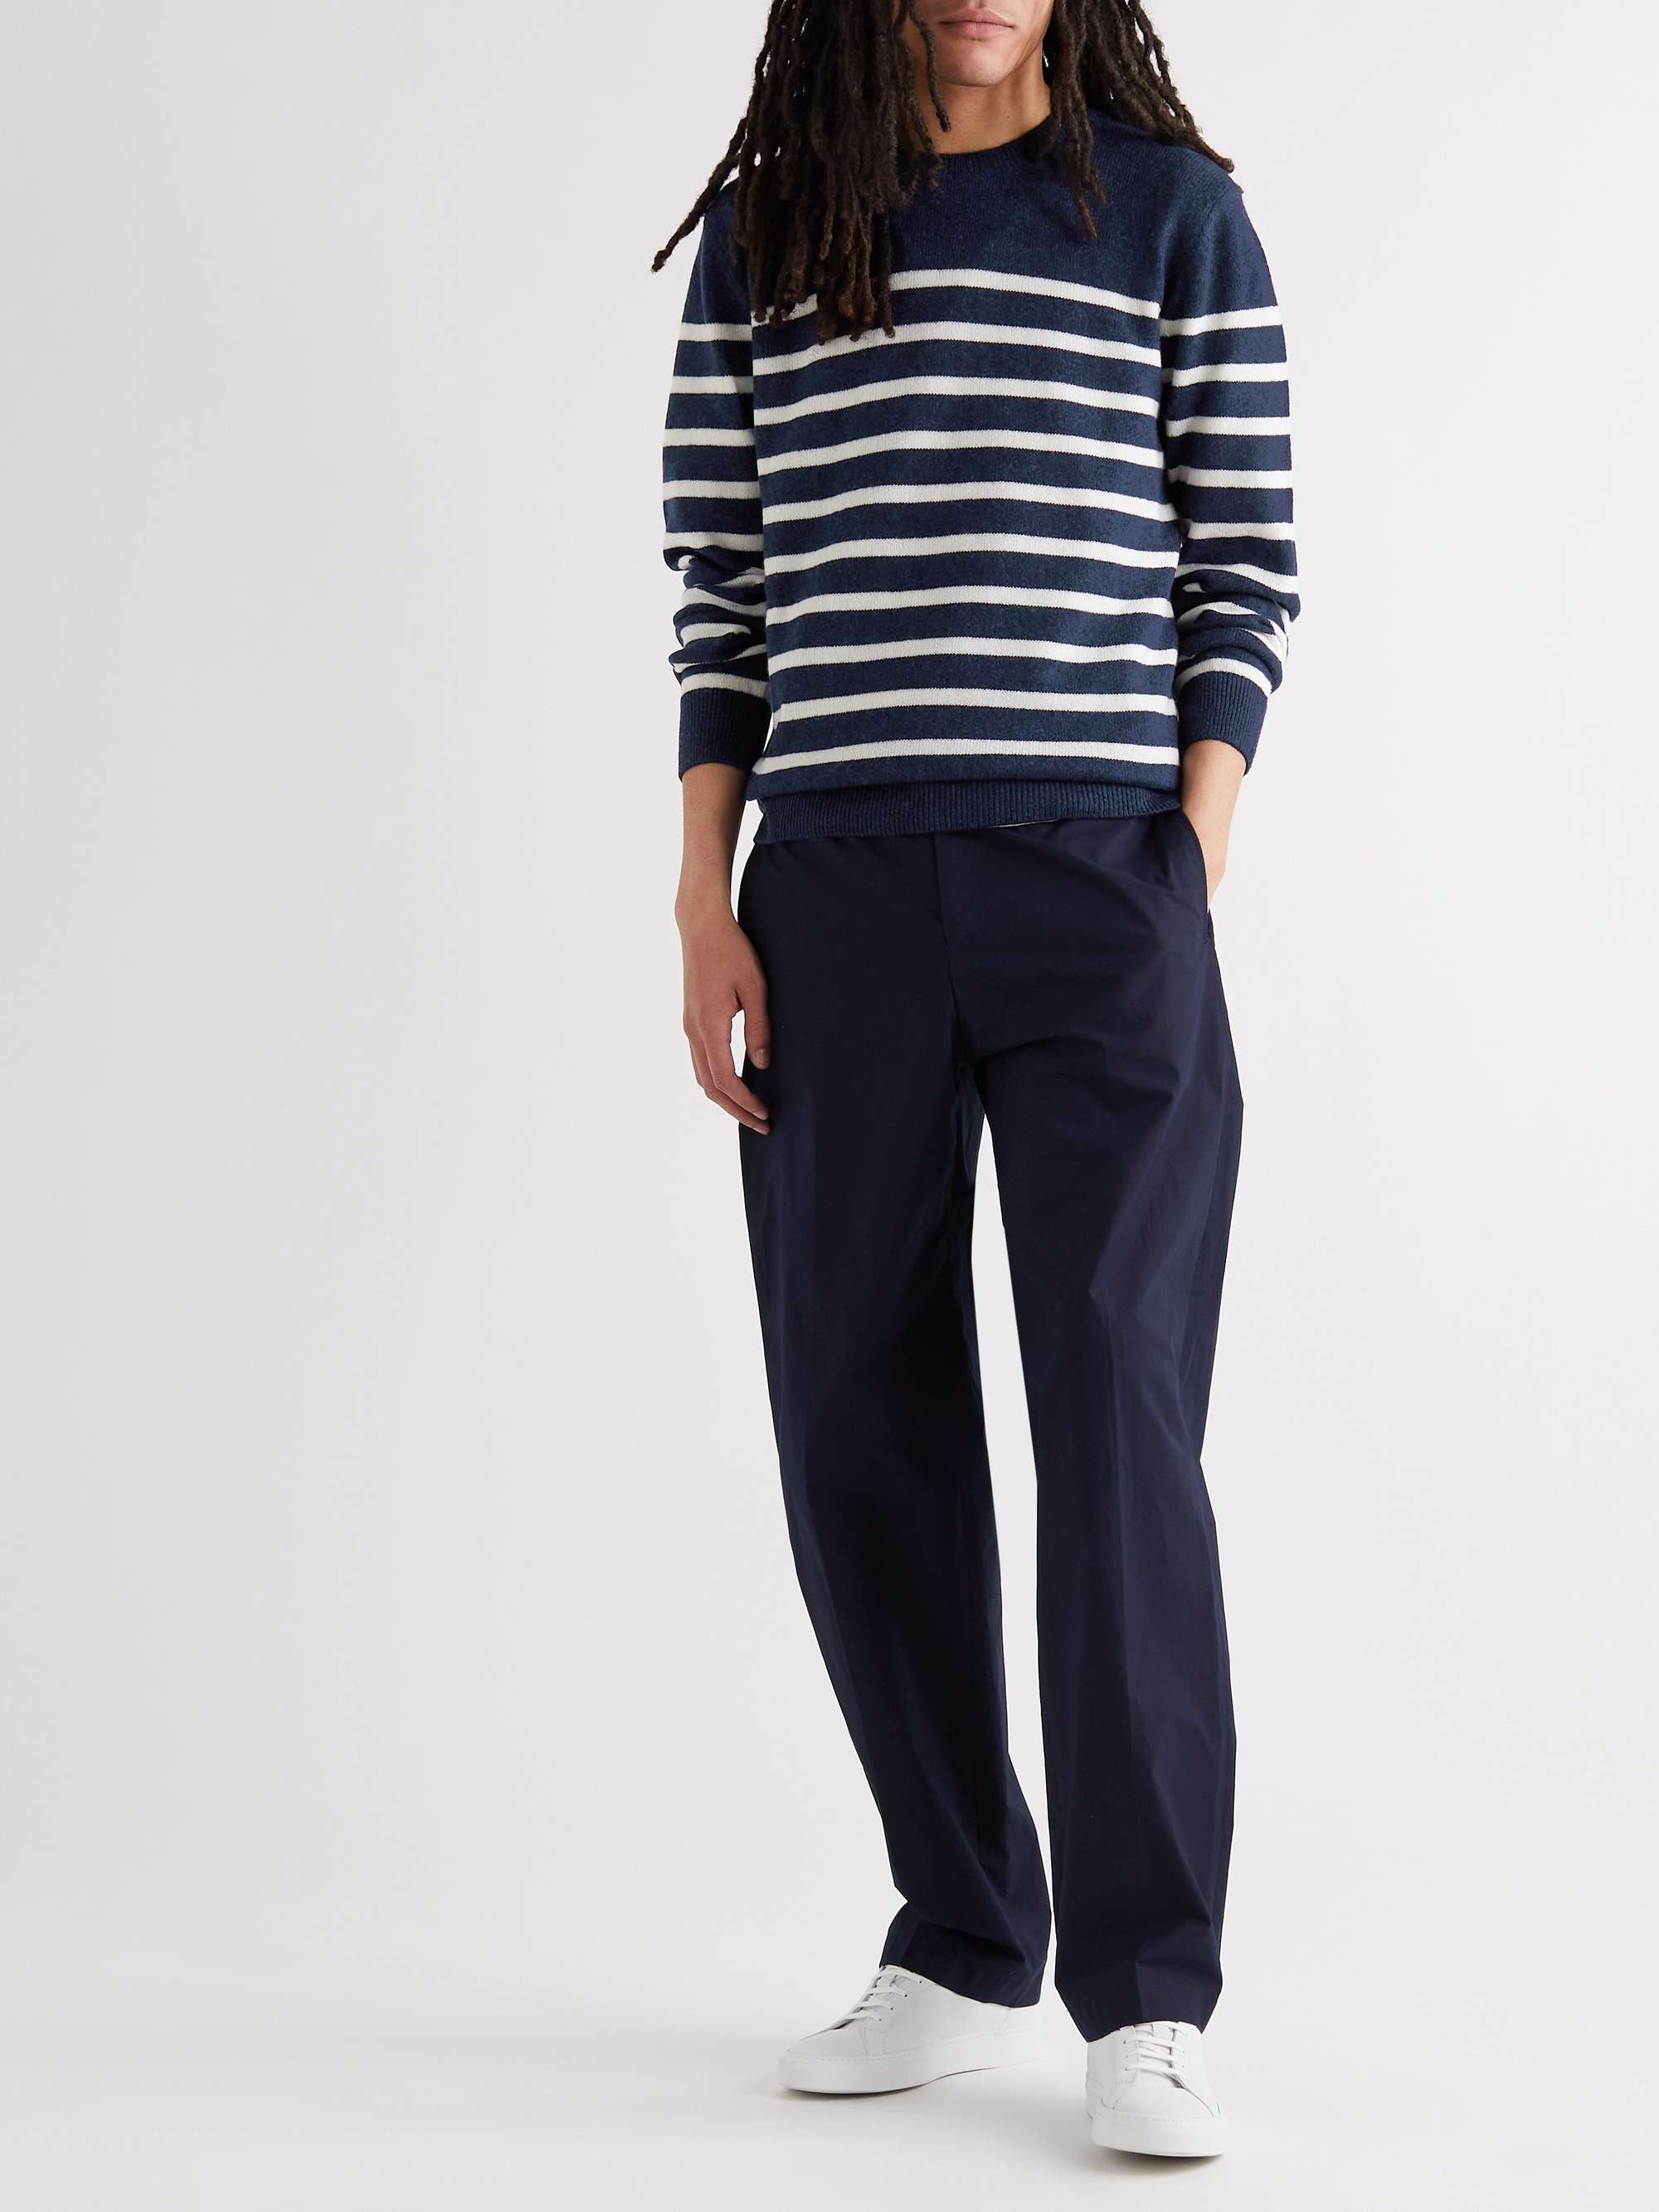 A.P.C. Travis Striped Wool and Cotton-Blend Sweater